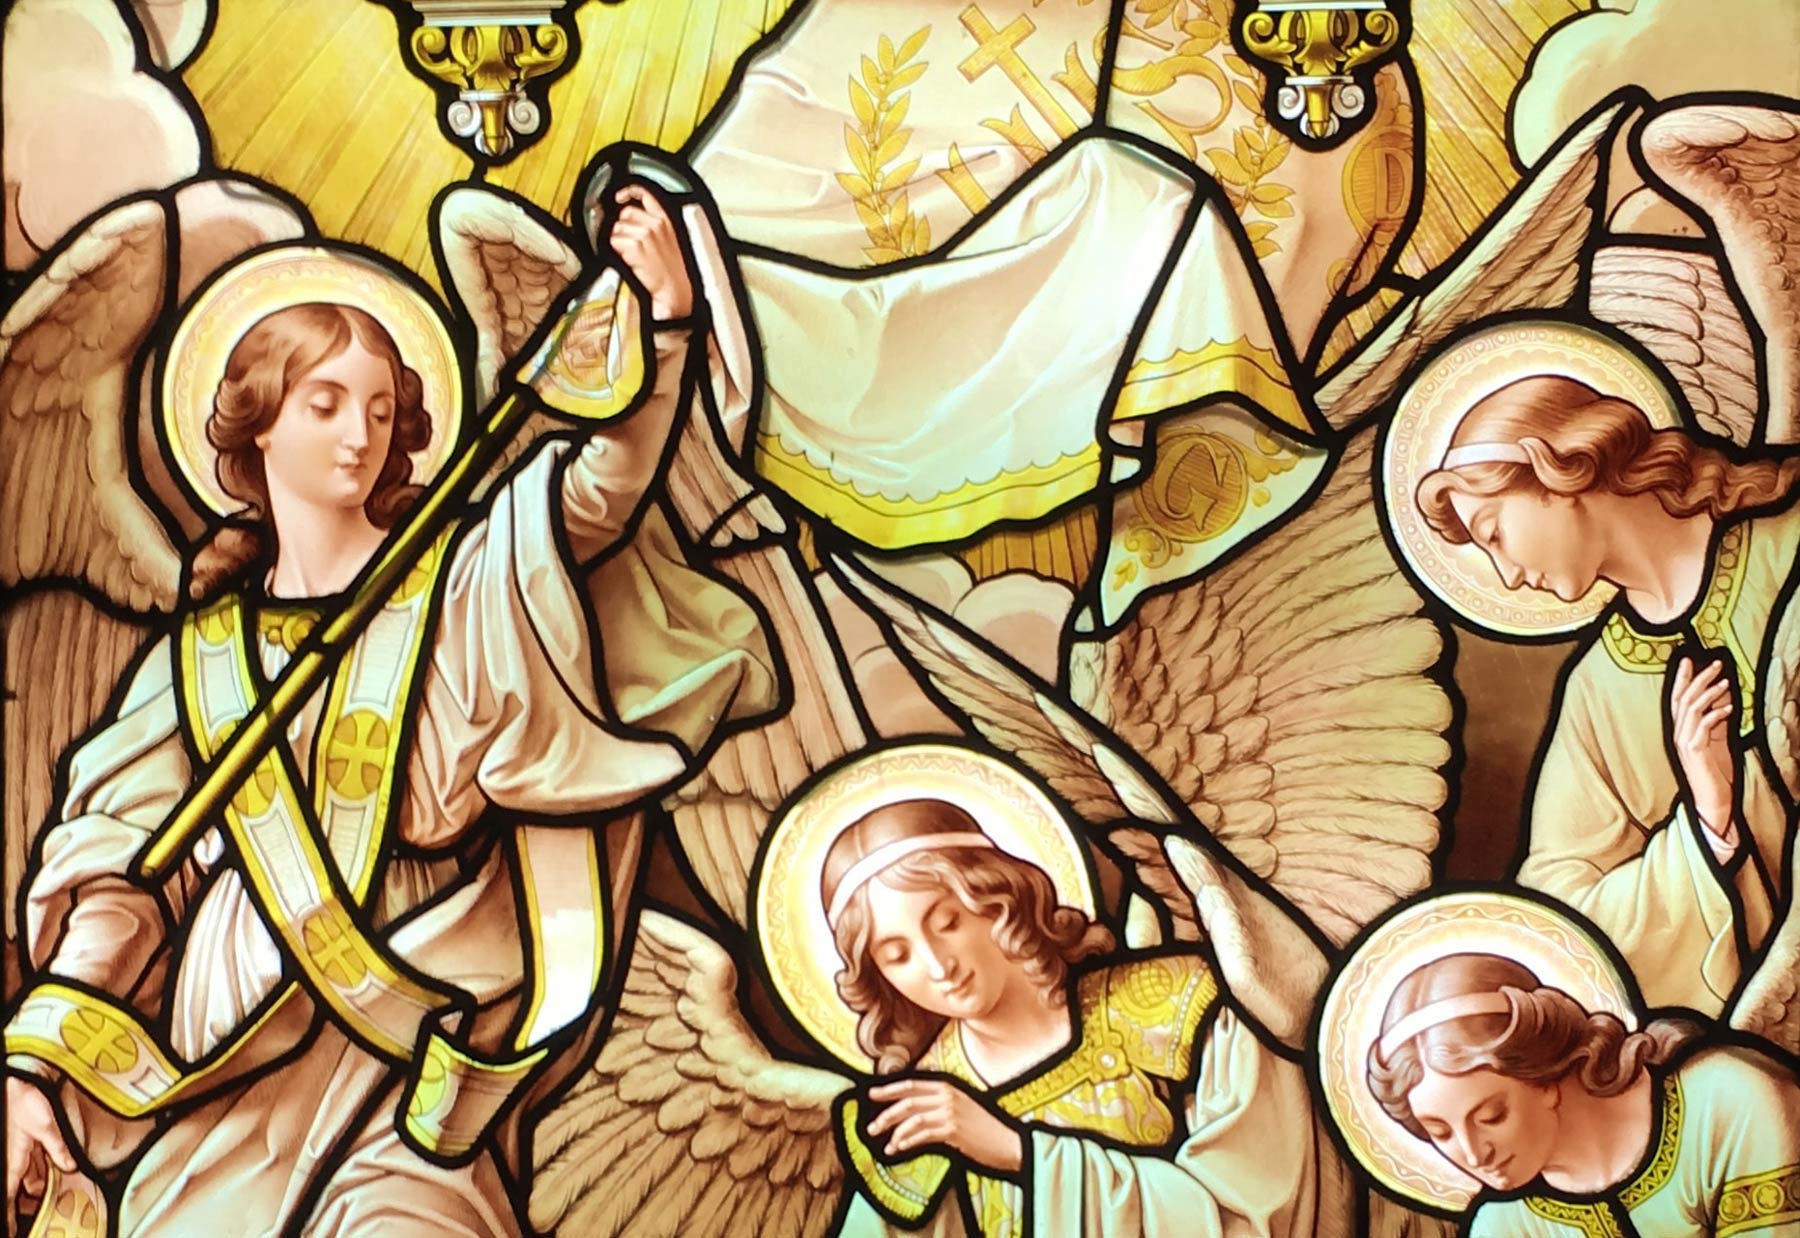 Image of Angels